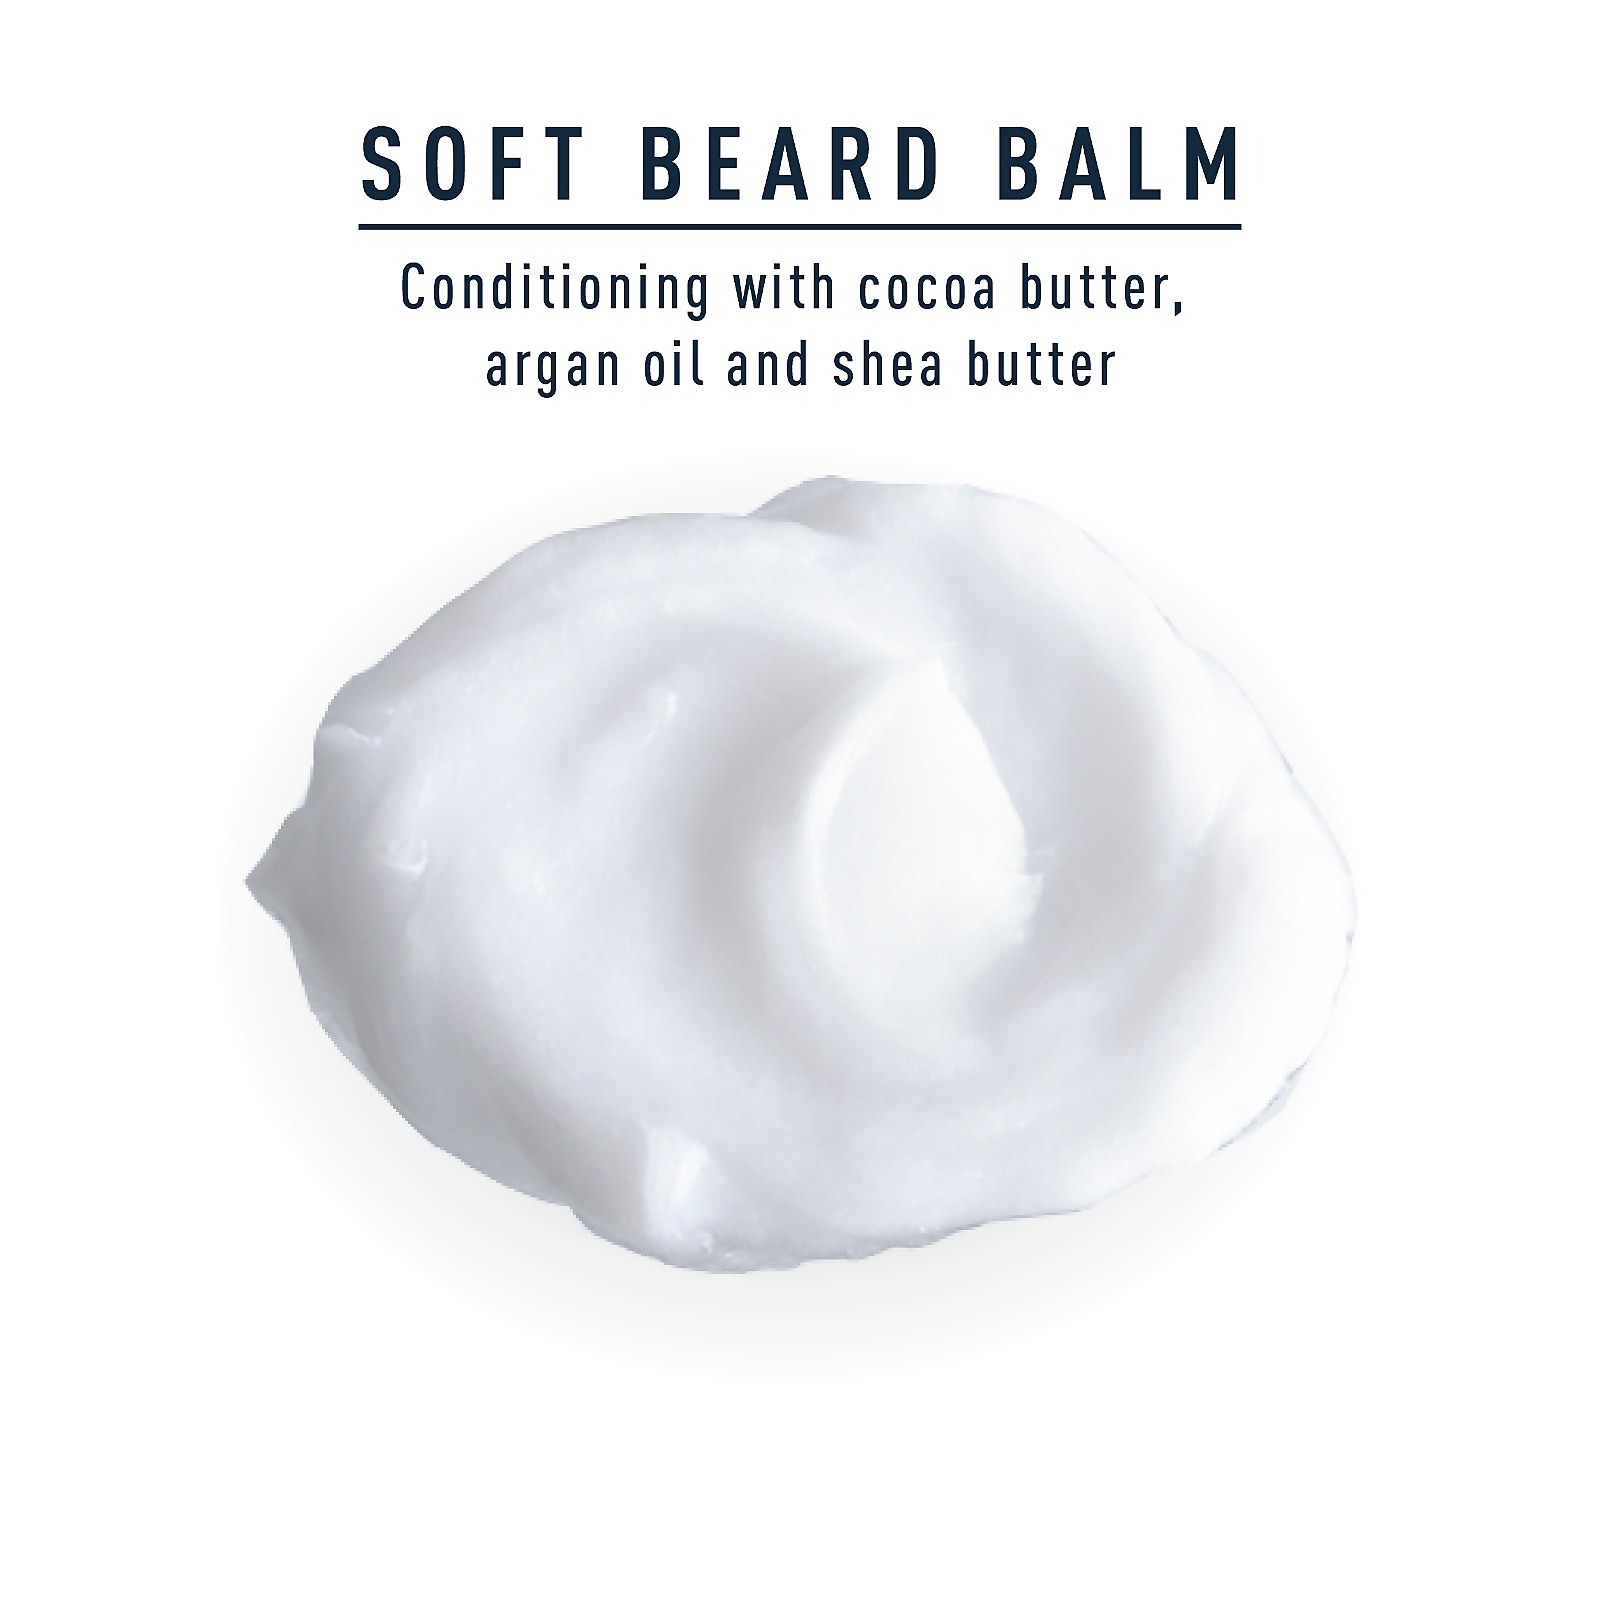 SOFT BEARD BALM Conditioning with cocoa butter,argan oil and shea butter